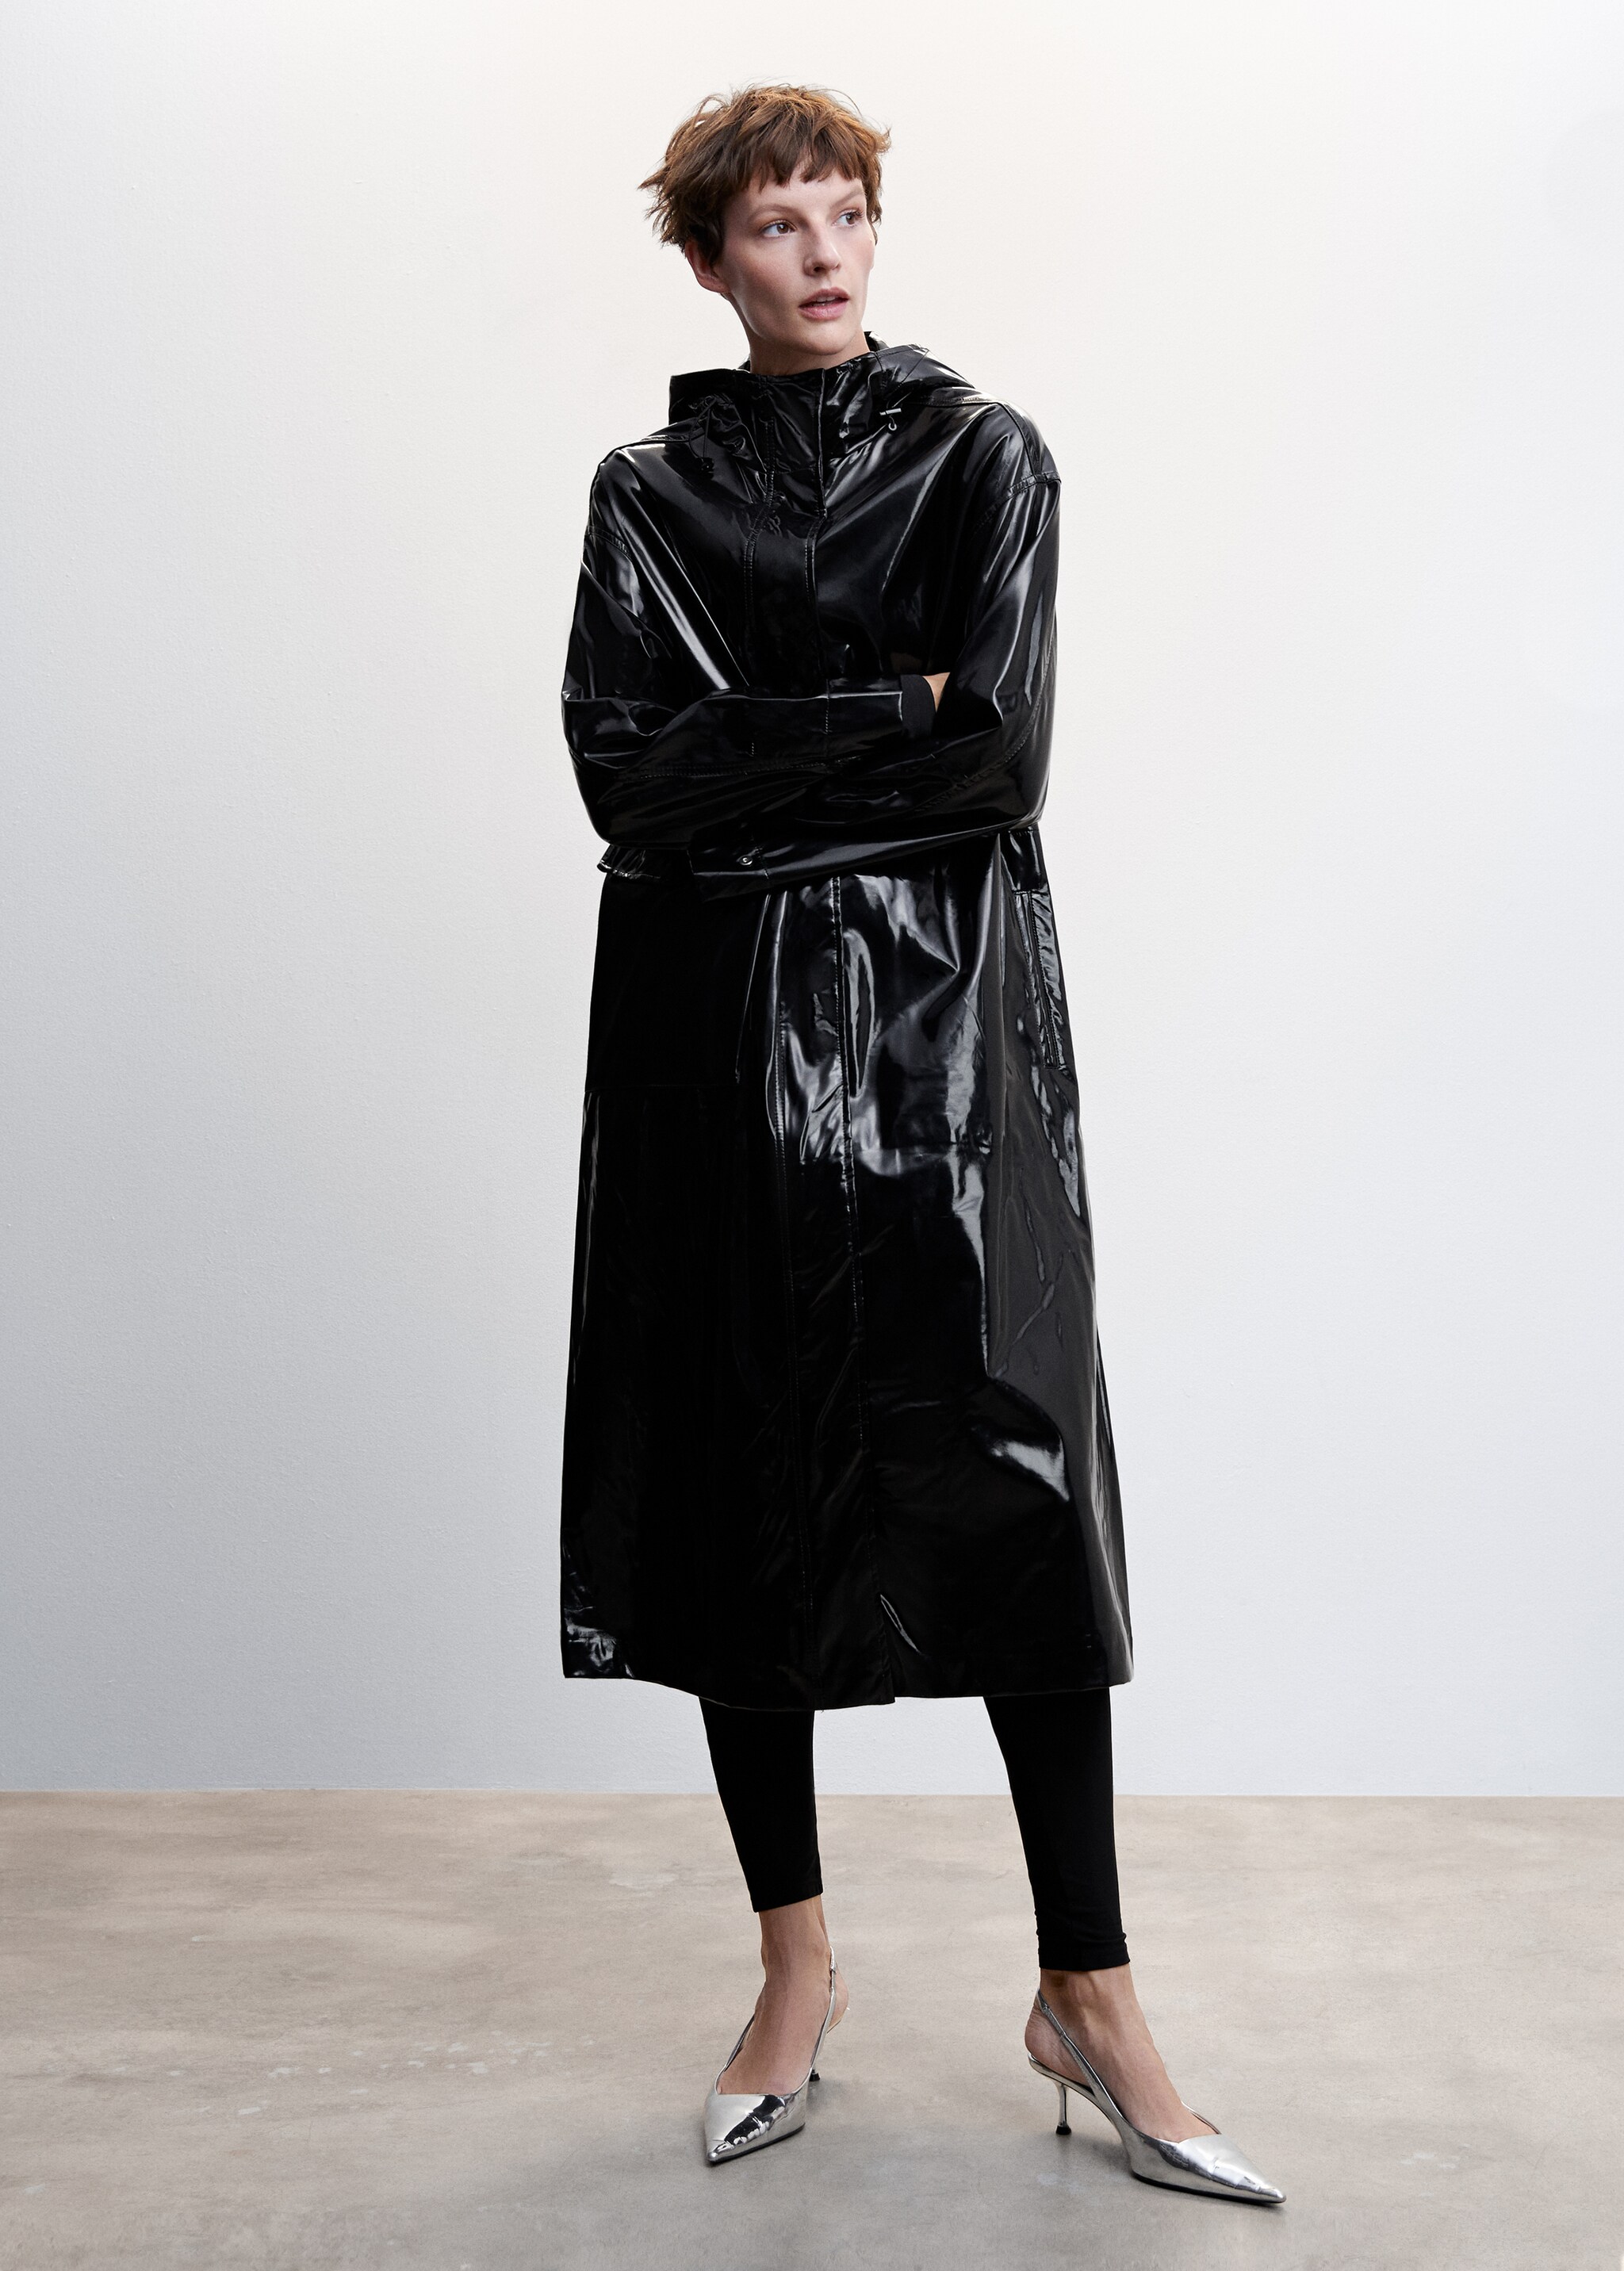 Patent leather hooded parka - General plane